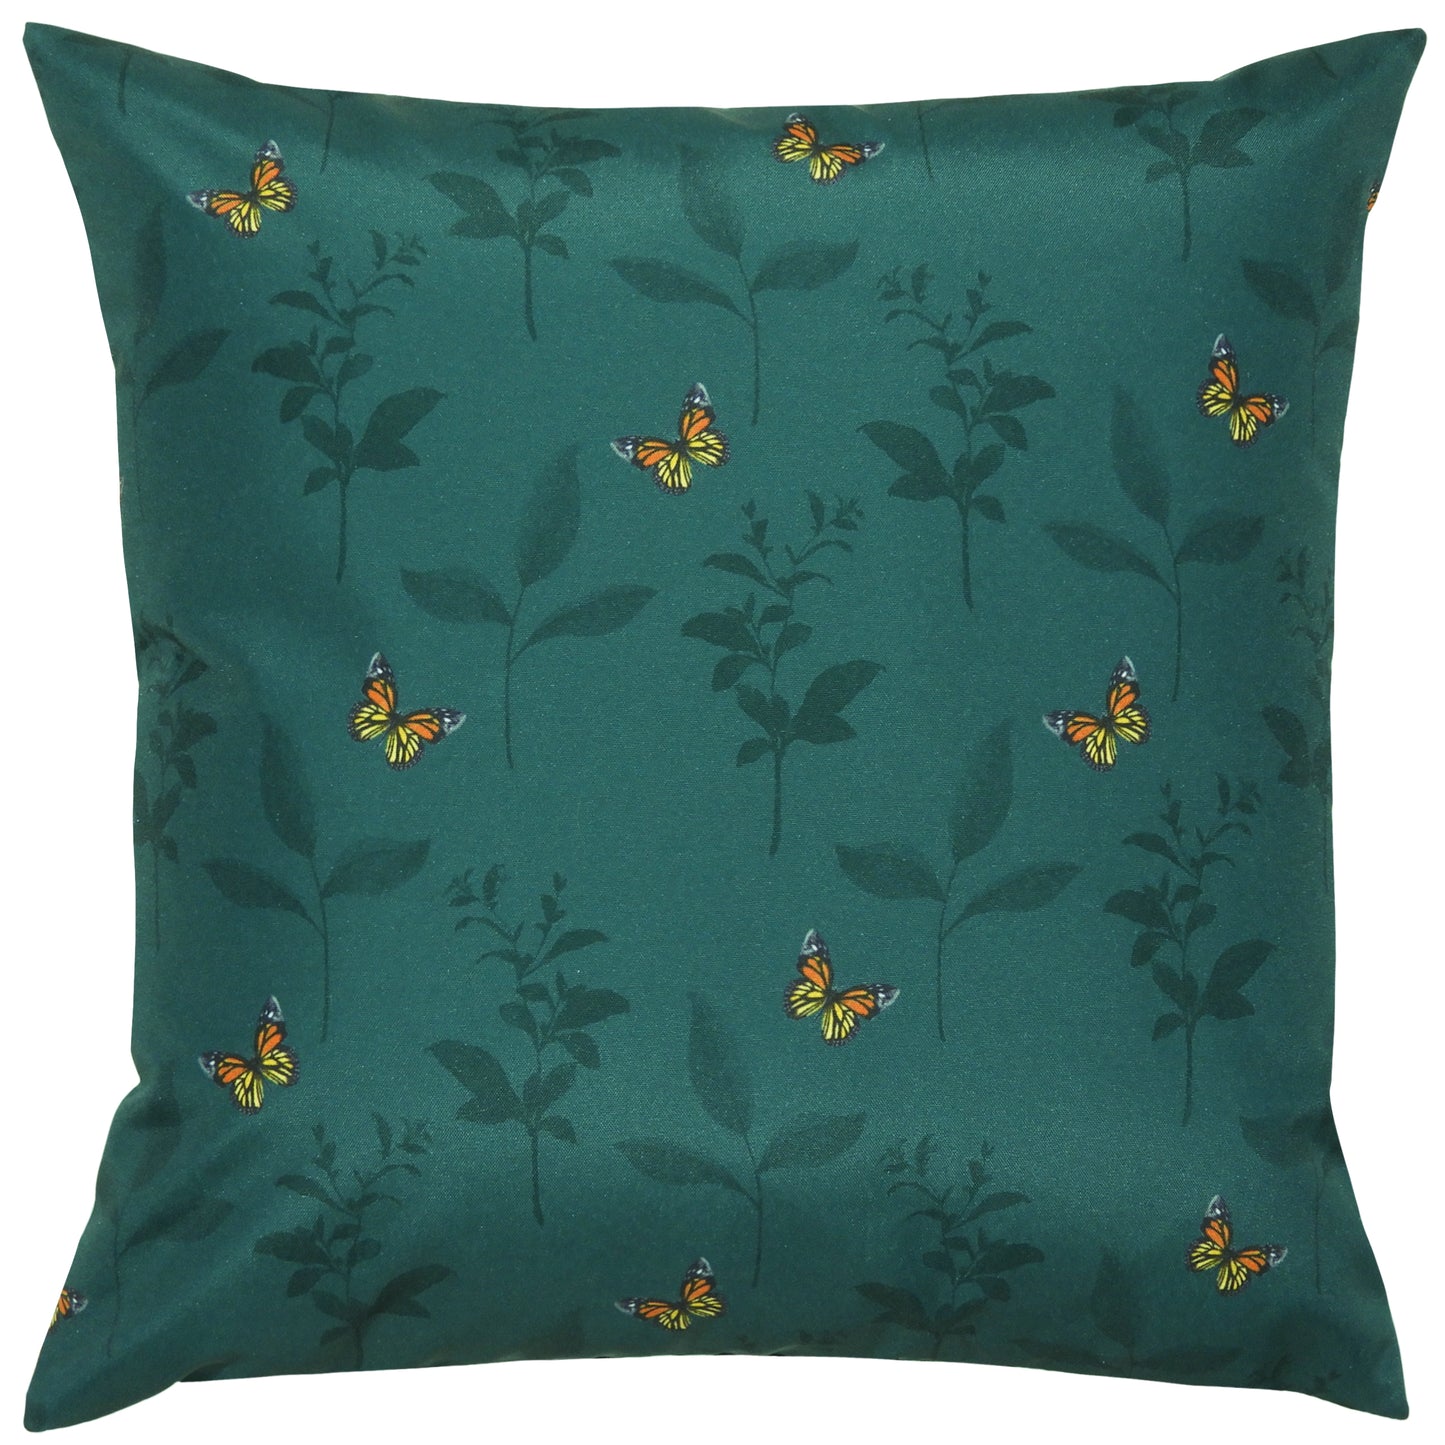 Decorative Outdoor Cushion "Butterfly"